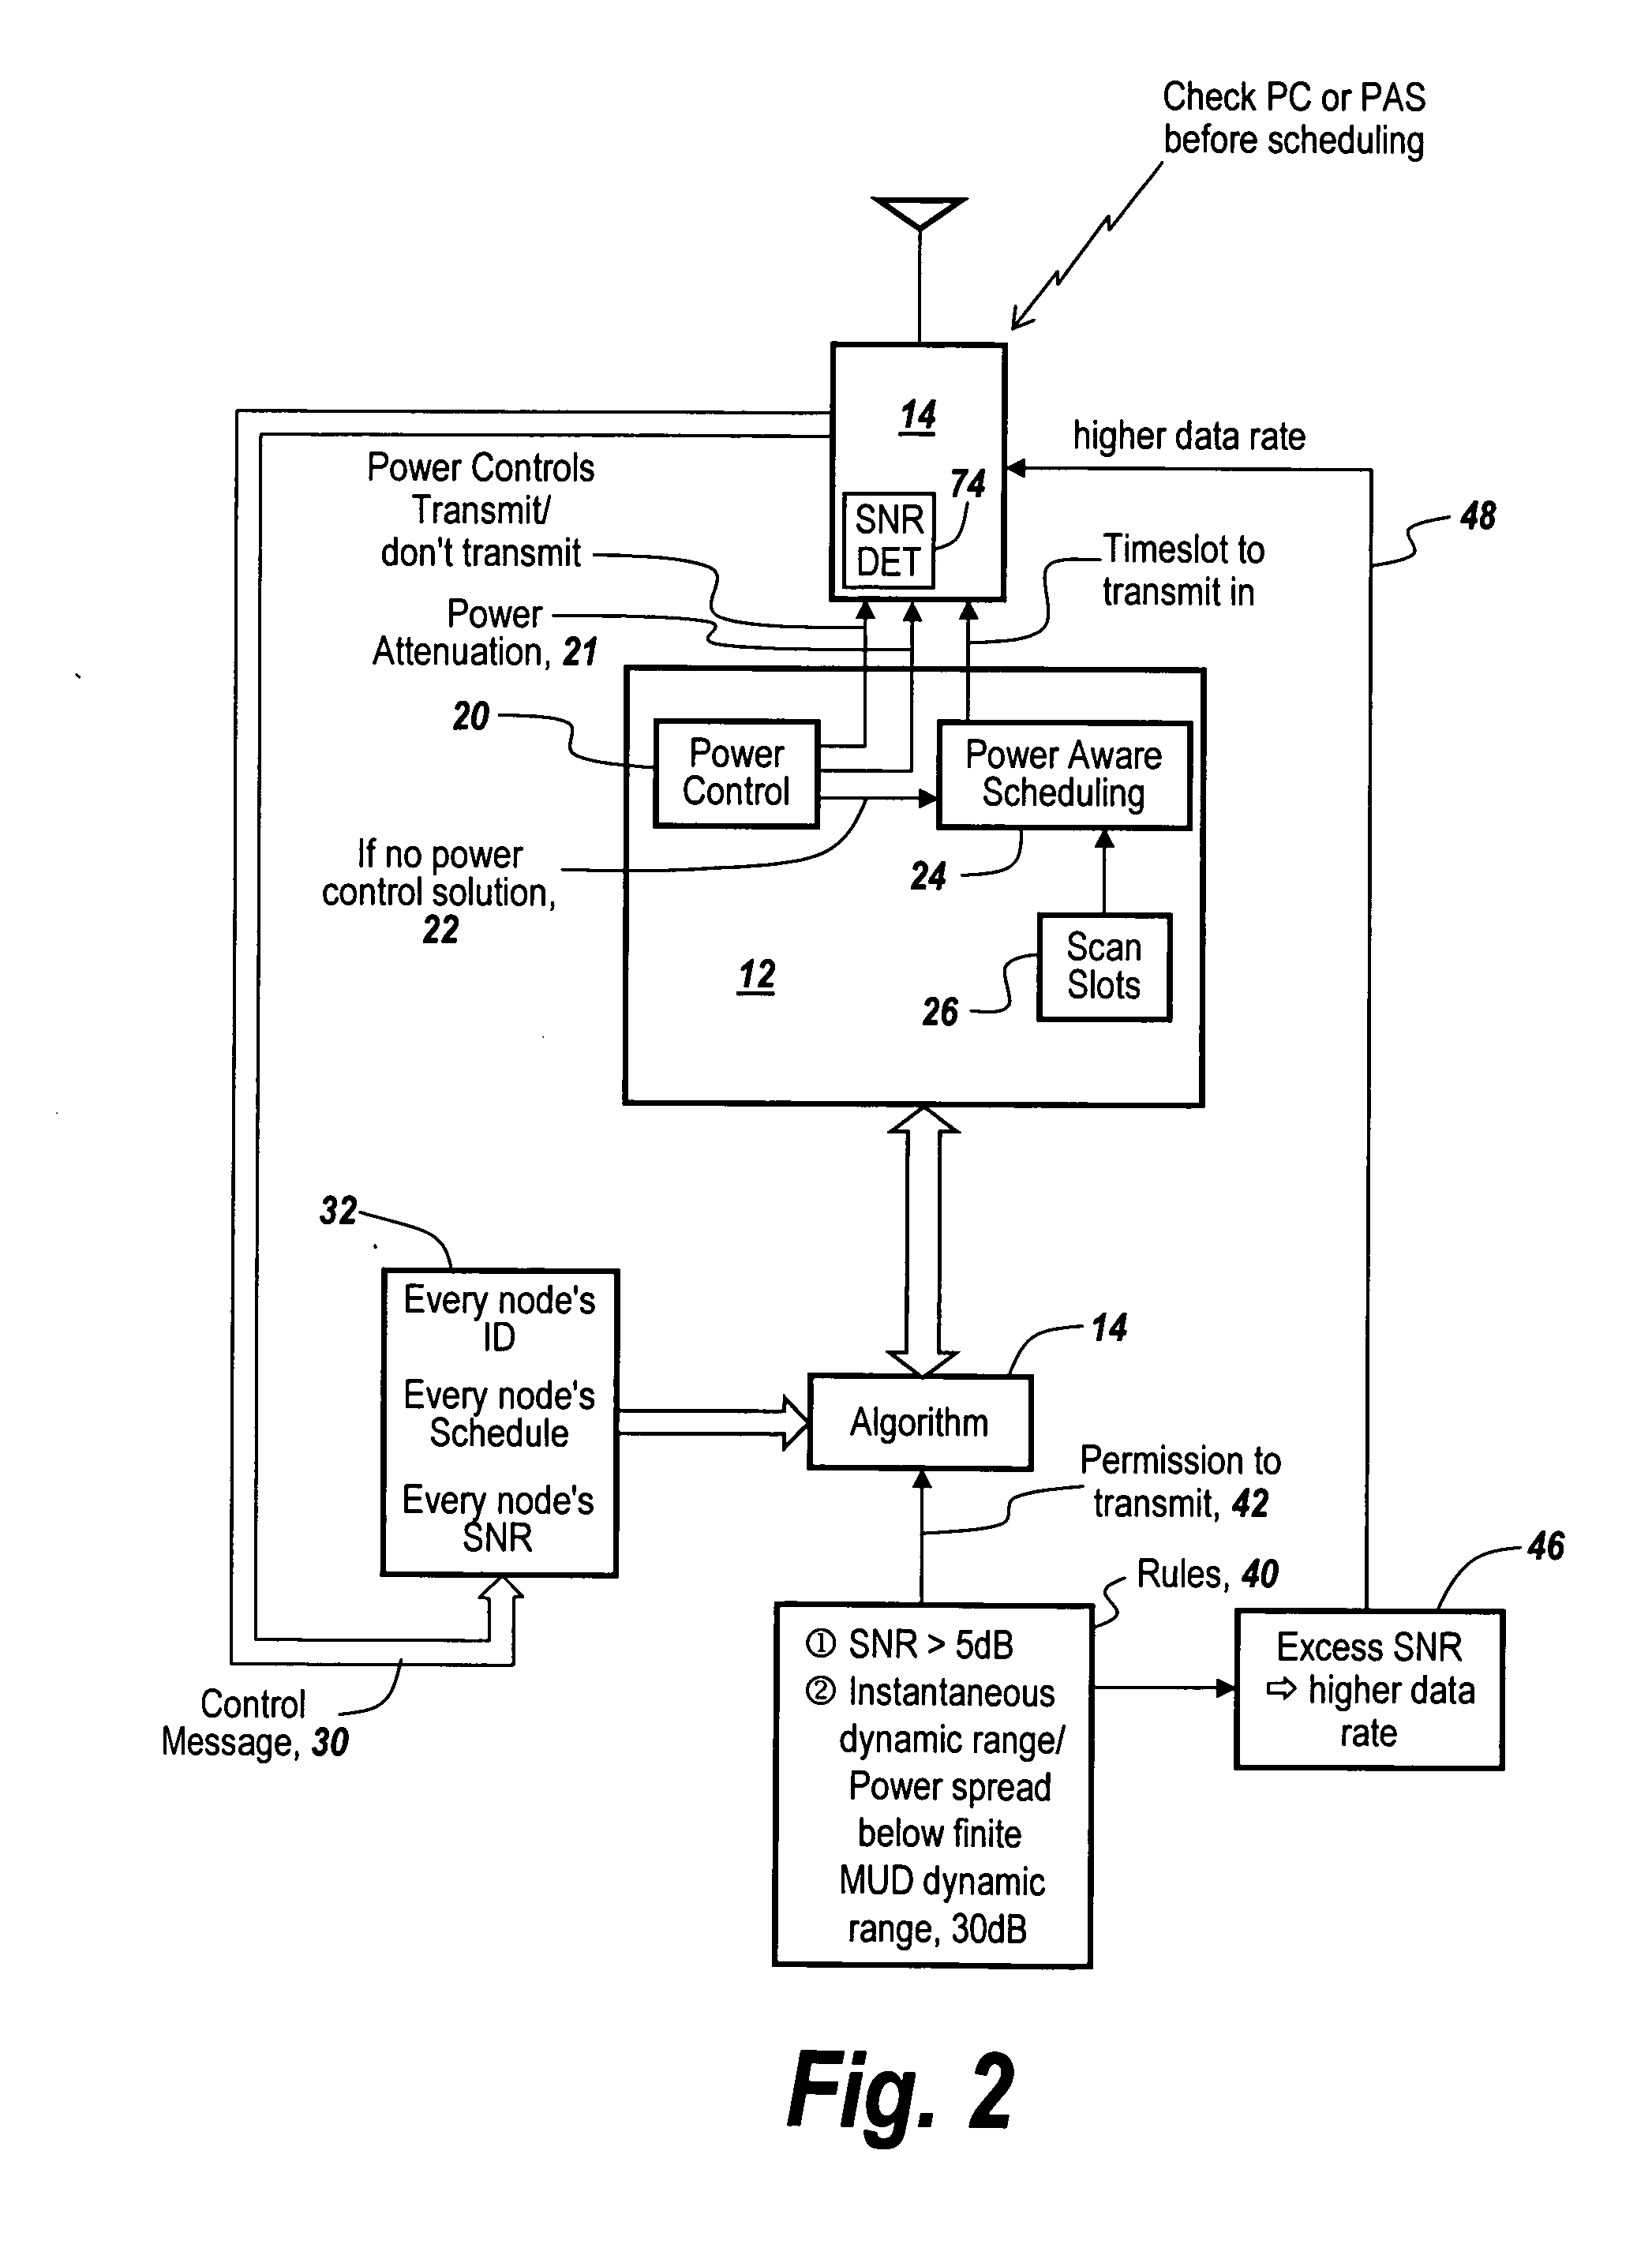 Power aware scheduling and power control techniques for multiuser detection enabled wireless mobile ad-hoc networks